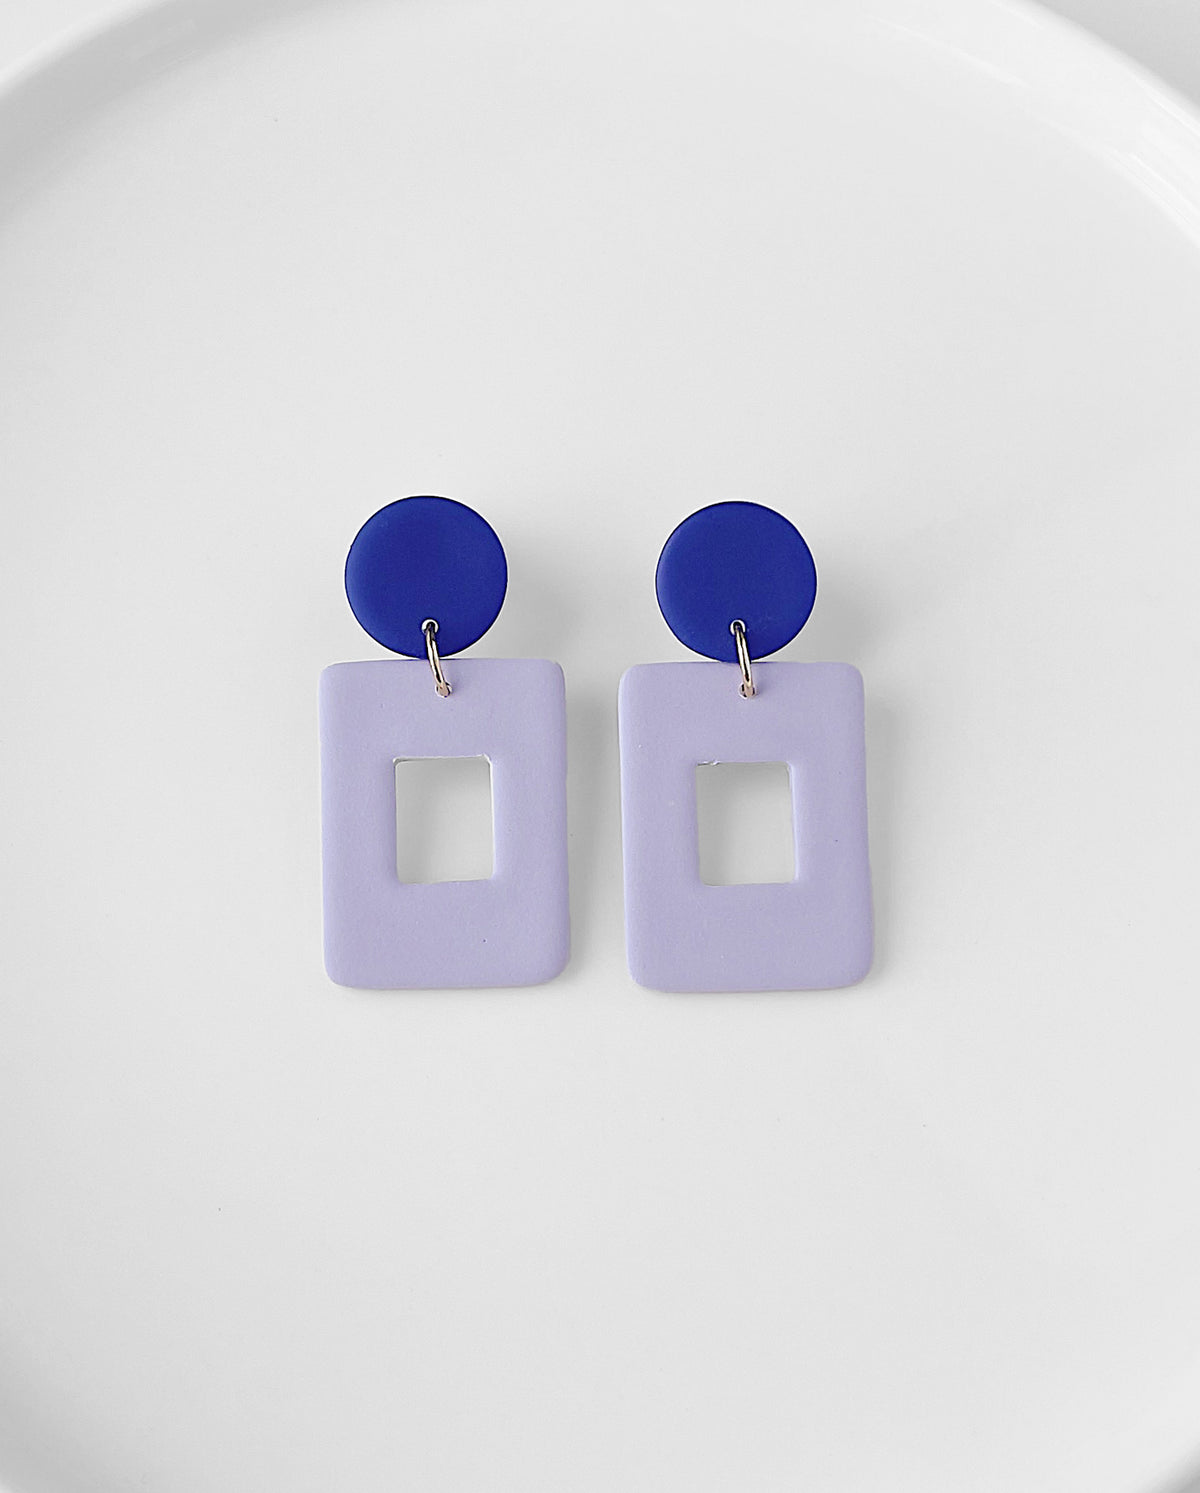 Muna earrings in Lilac color, Front view.